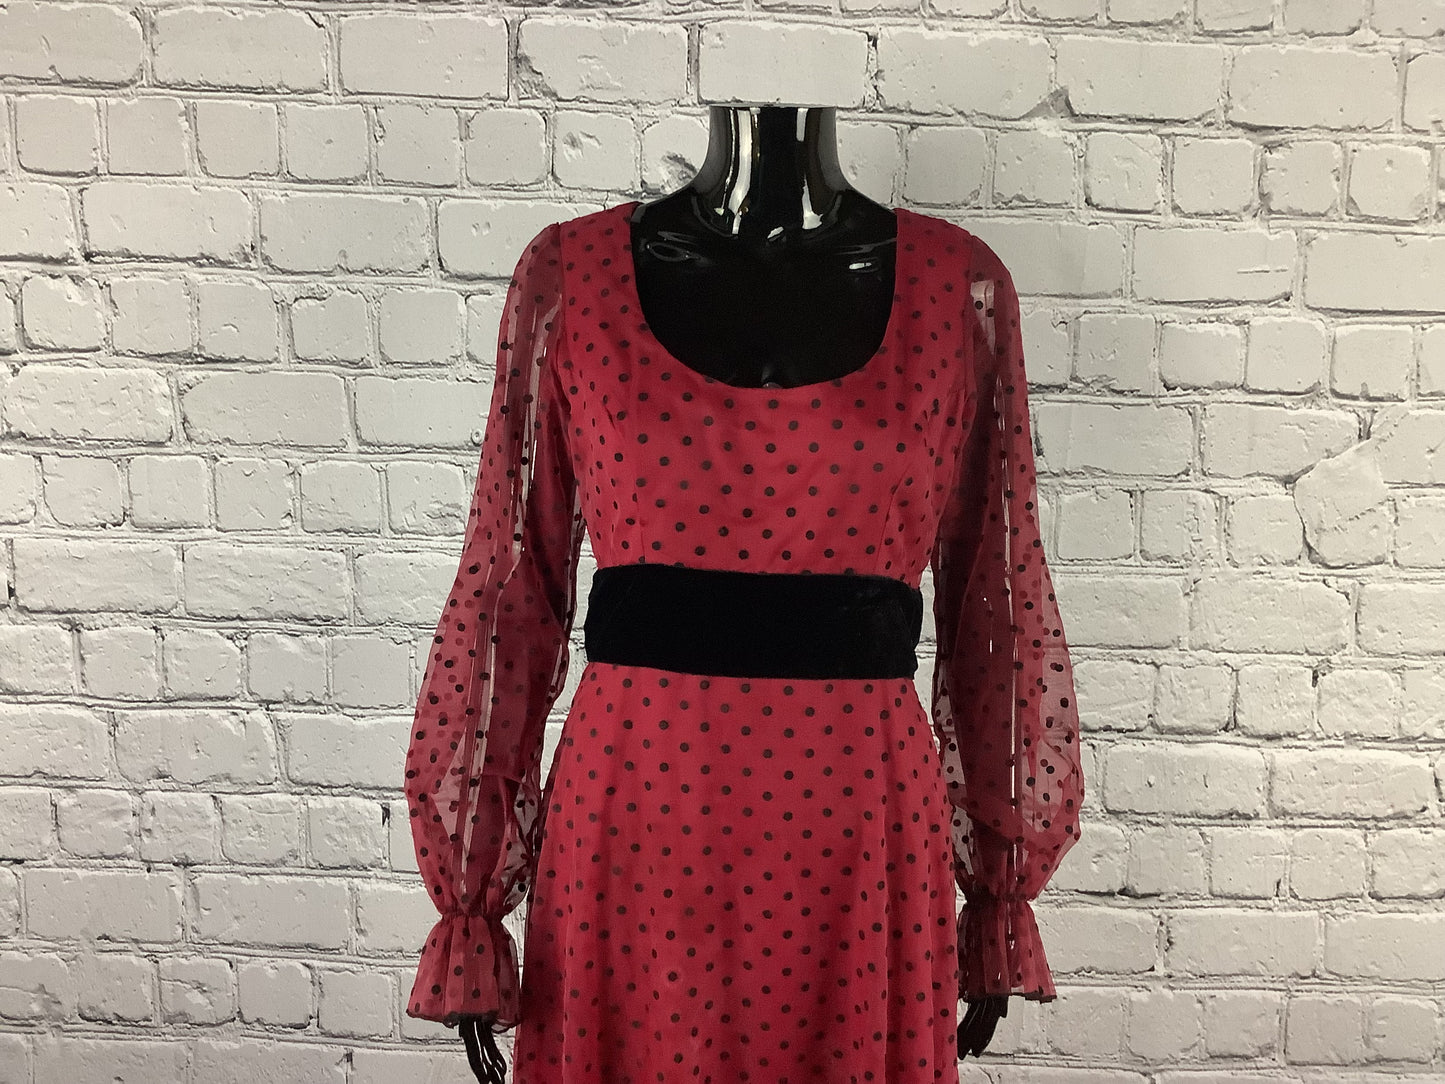 1960’s to 1970’s Vintage Red and Black Floor Length Polka Dot Dress